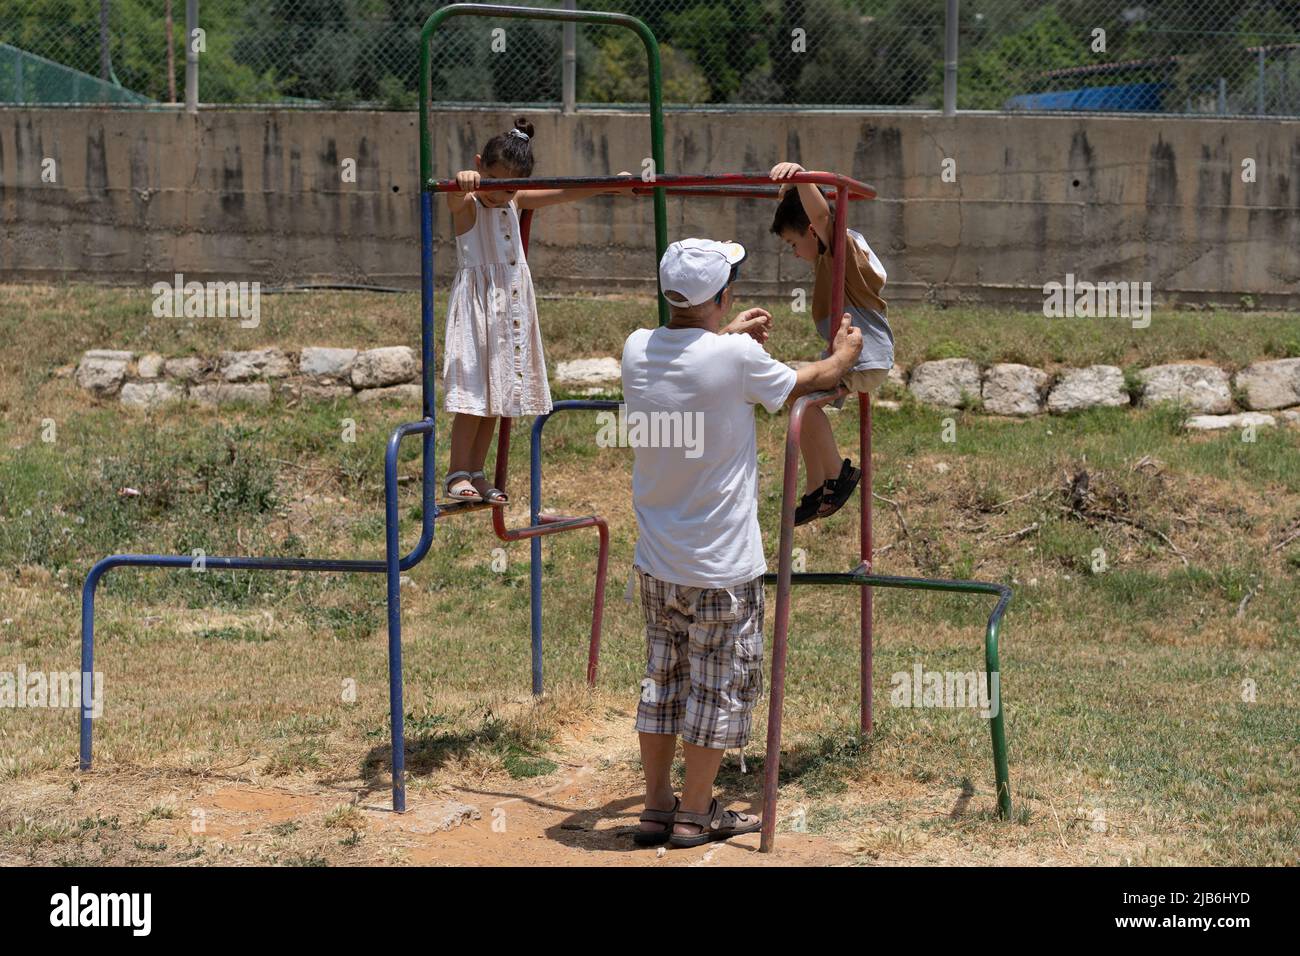 Grandchildren having fun with grandfather during sunny day in the playground. Back view senior man supporting her little grandson while playing at the outdoor playground on a lovely sunny day. Stock Photo